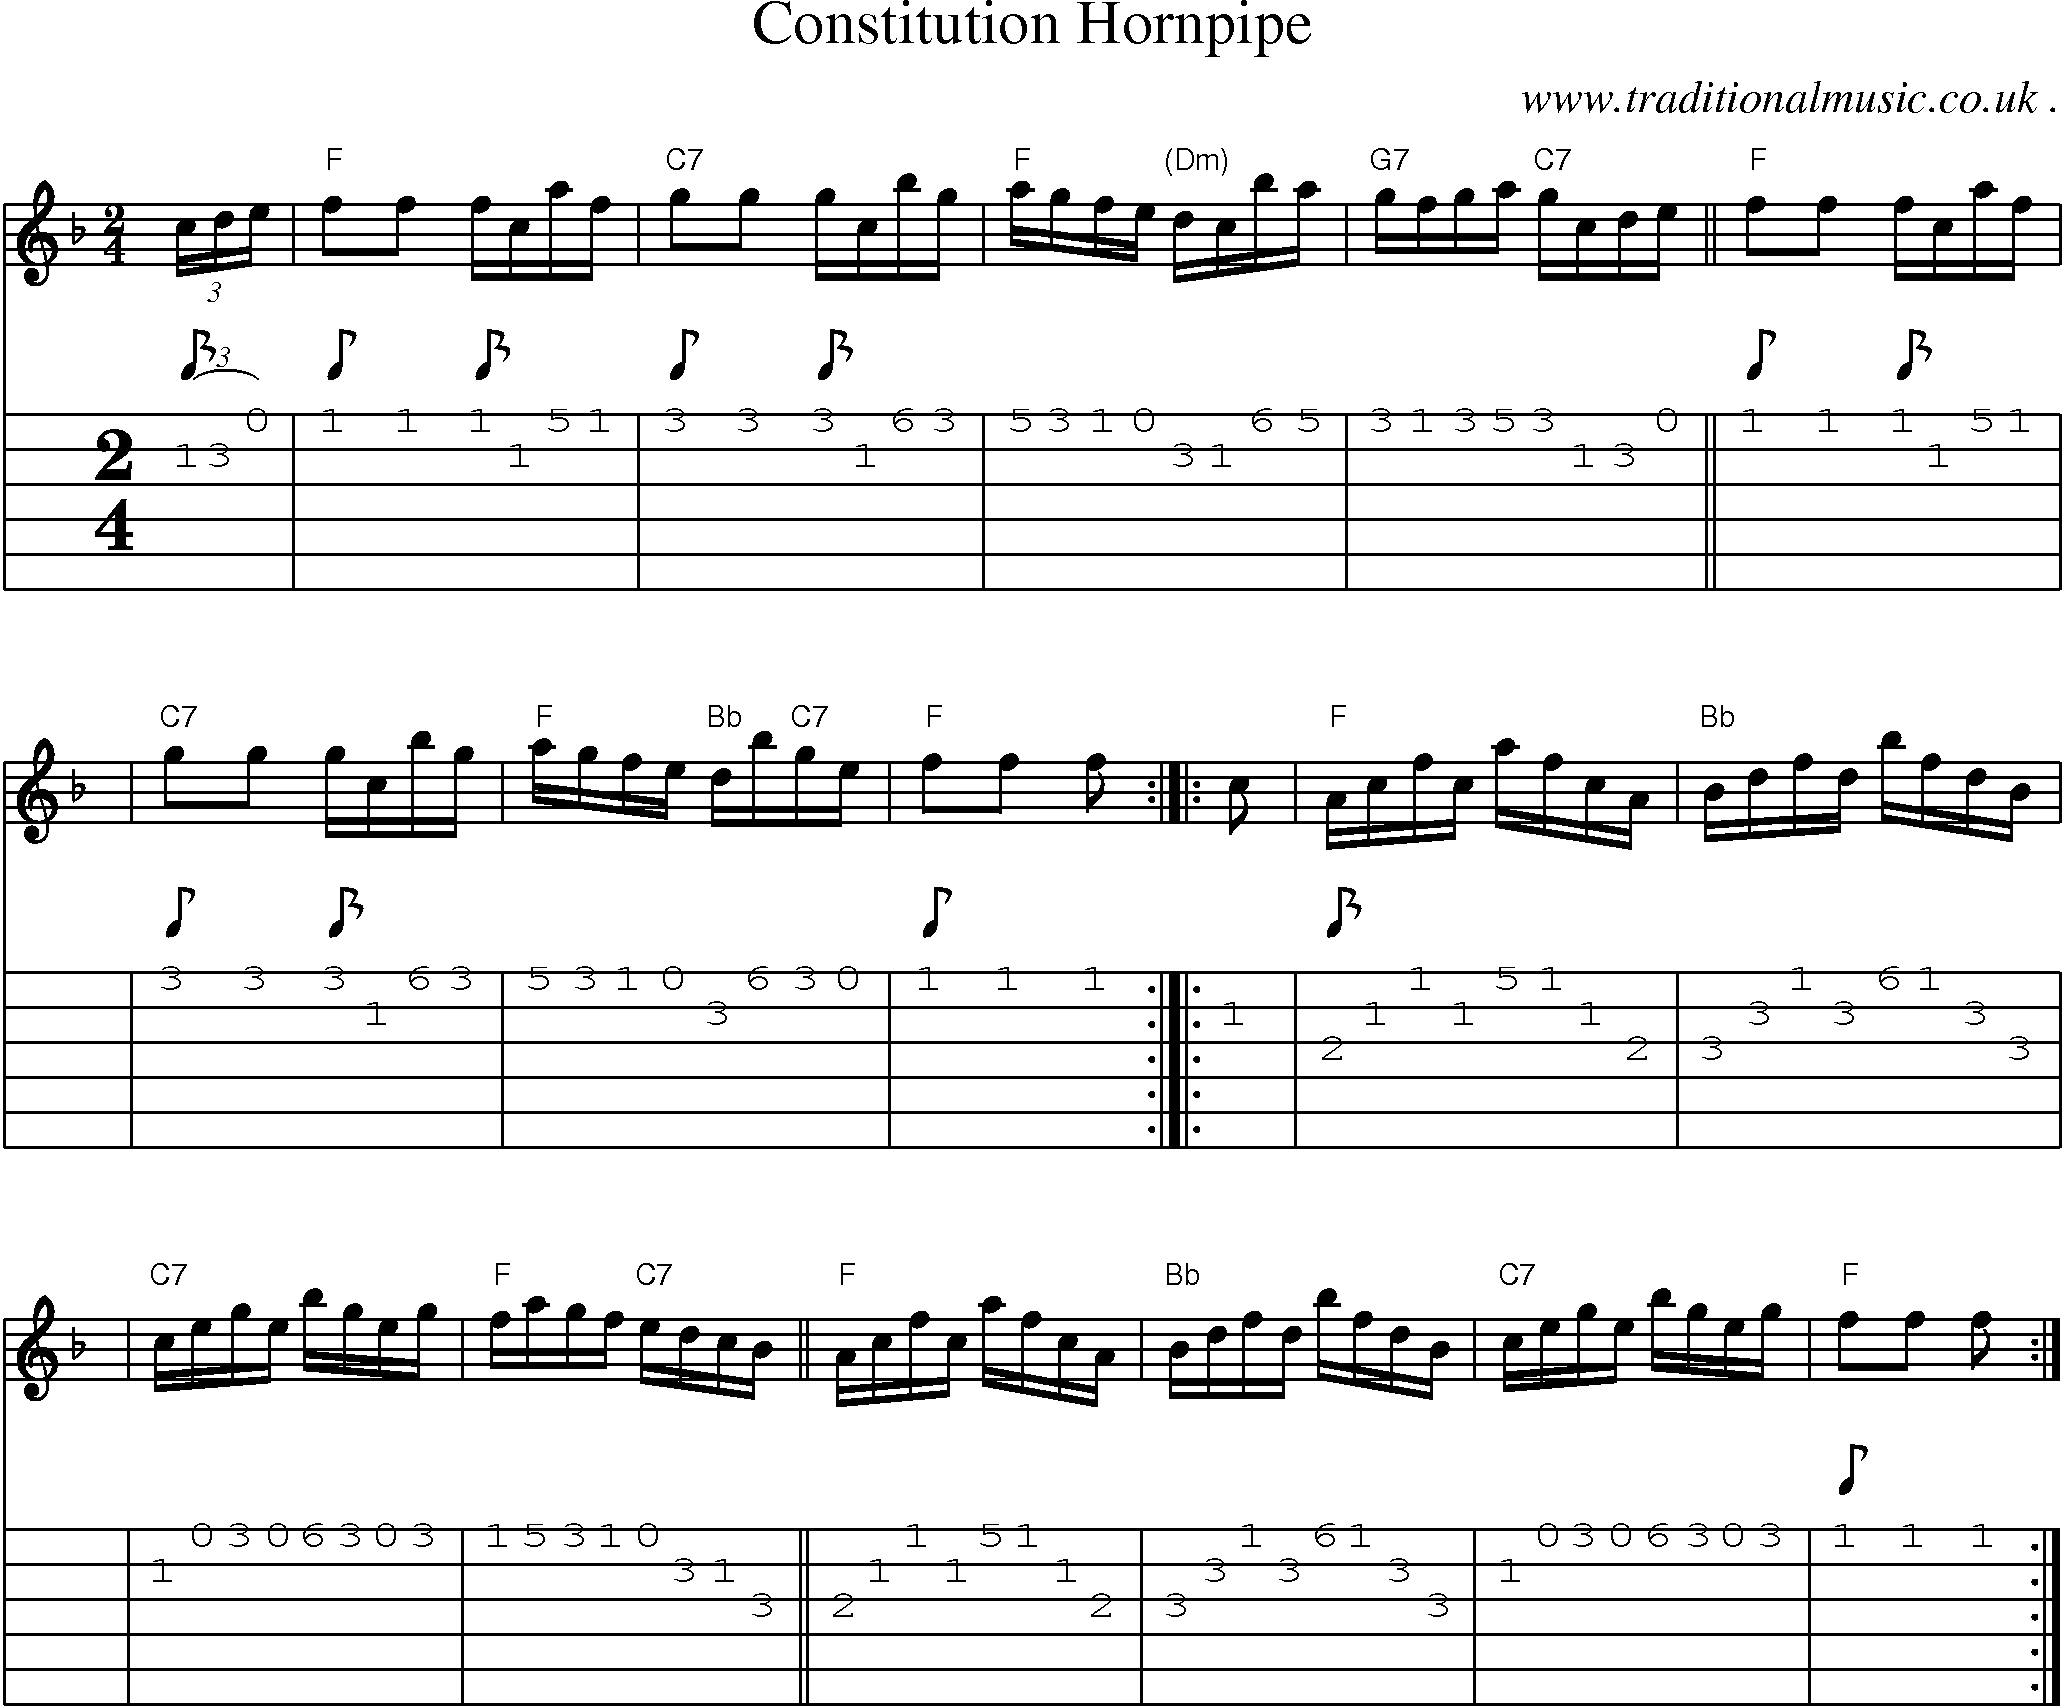 Sheet-music  score, Chords and Guitar Tabs for Constitution Hornpipe